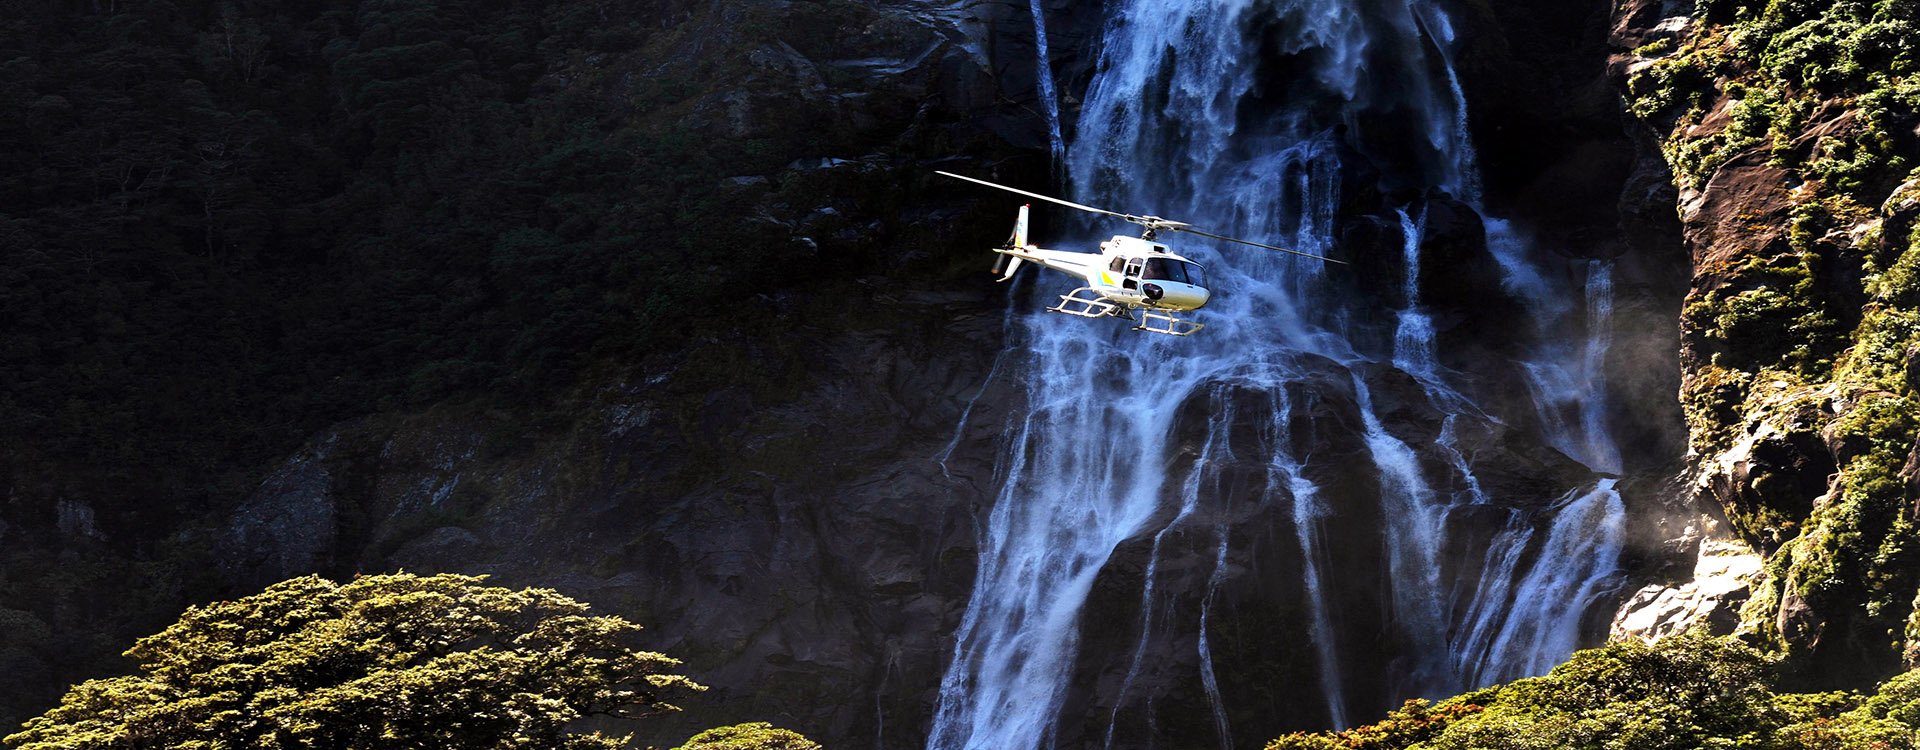 New Zealand_A helicopter flying over a waterfall in Fiordland national park in the South Island